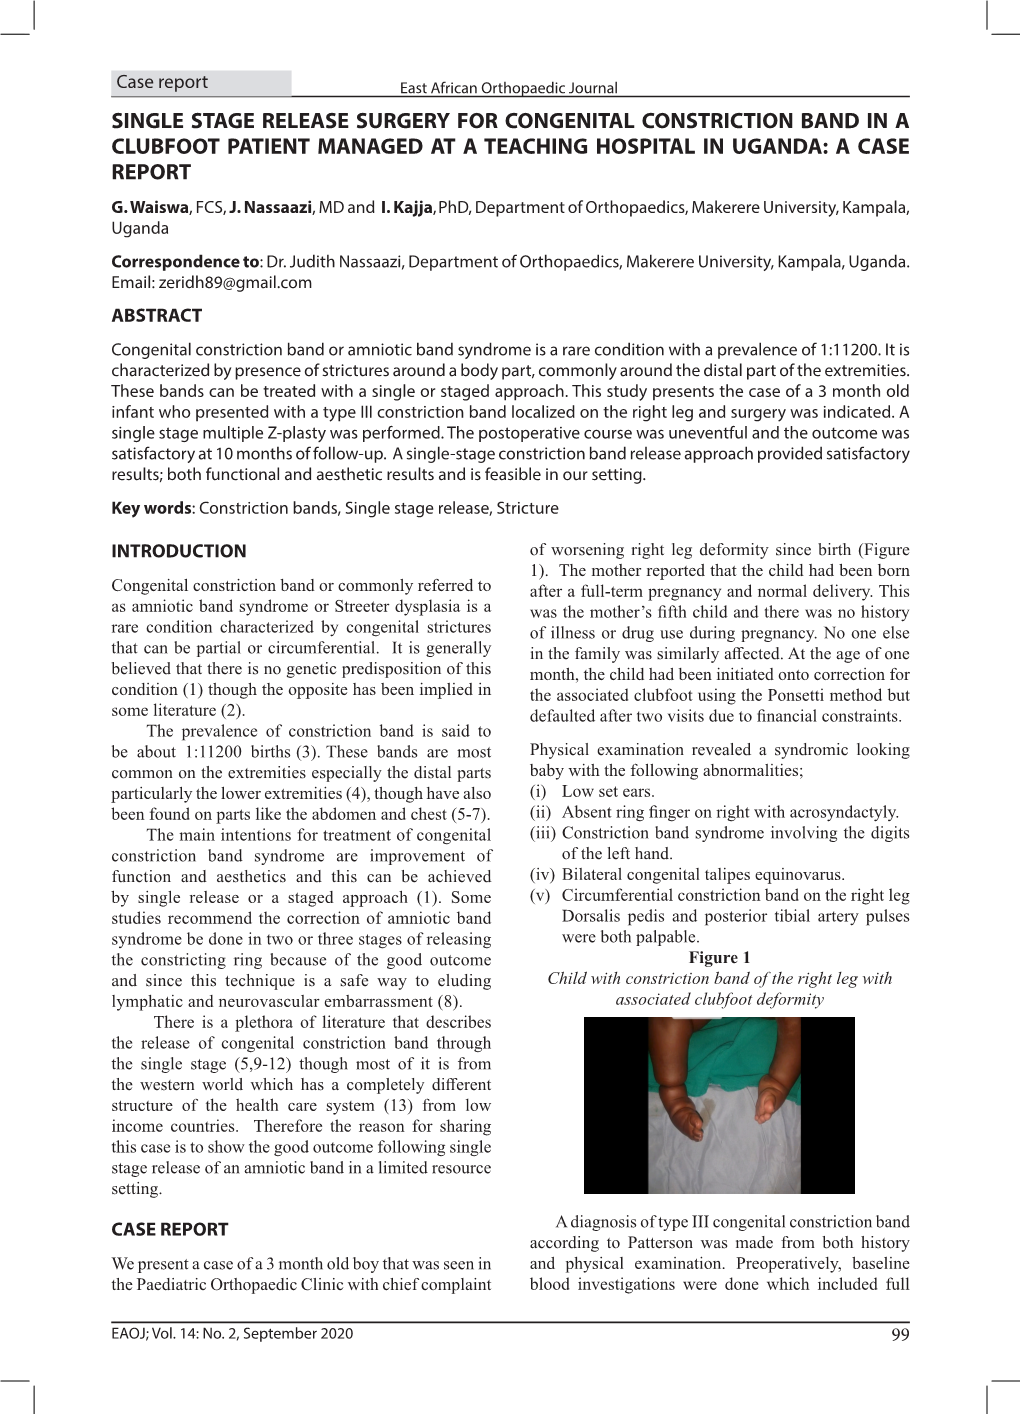 Single Stage Release Surgery for Congenital Constriction Band in a Clubfoot Patient Managed at a Teaching Hospital in Uganda: a Case Report G